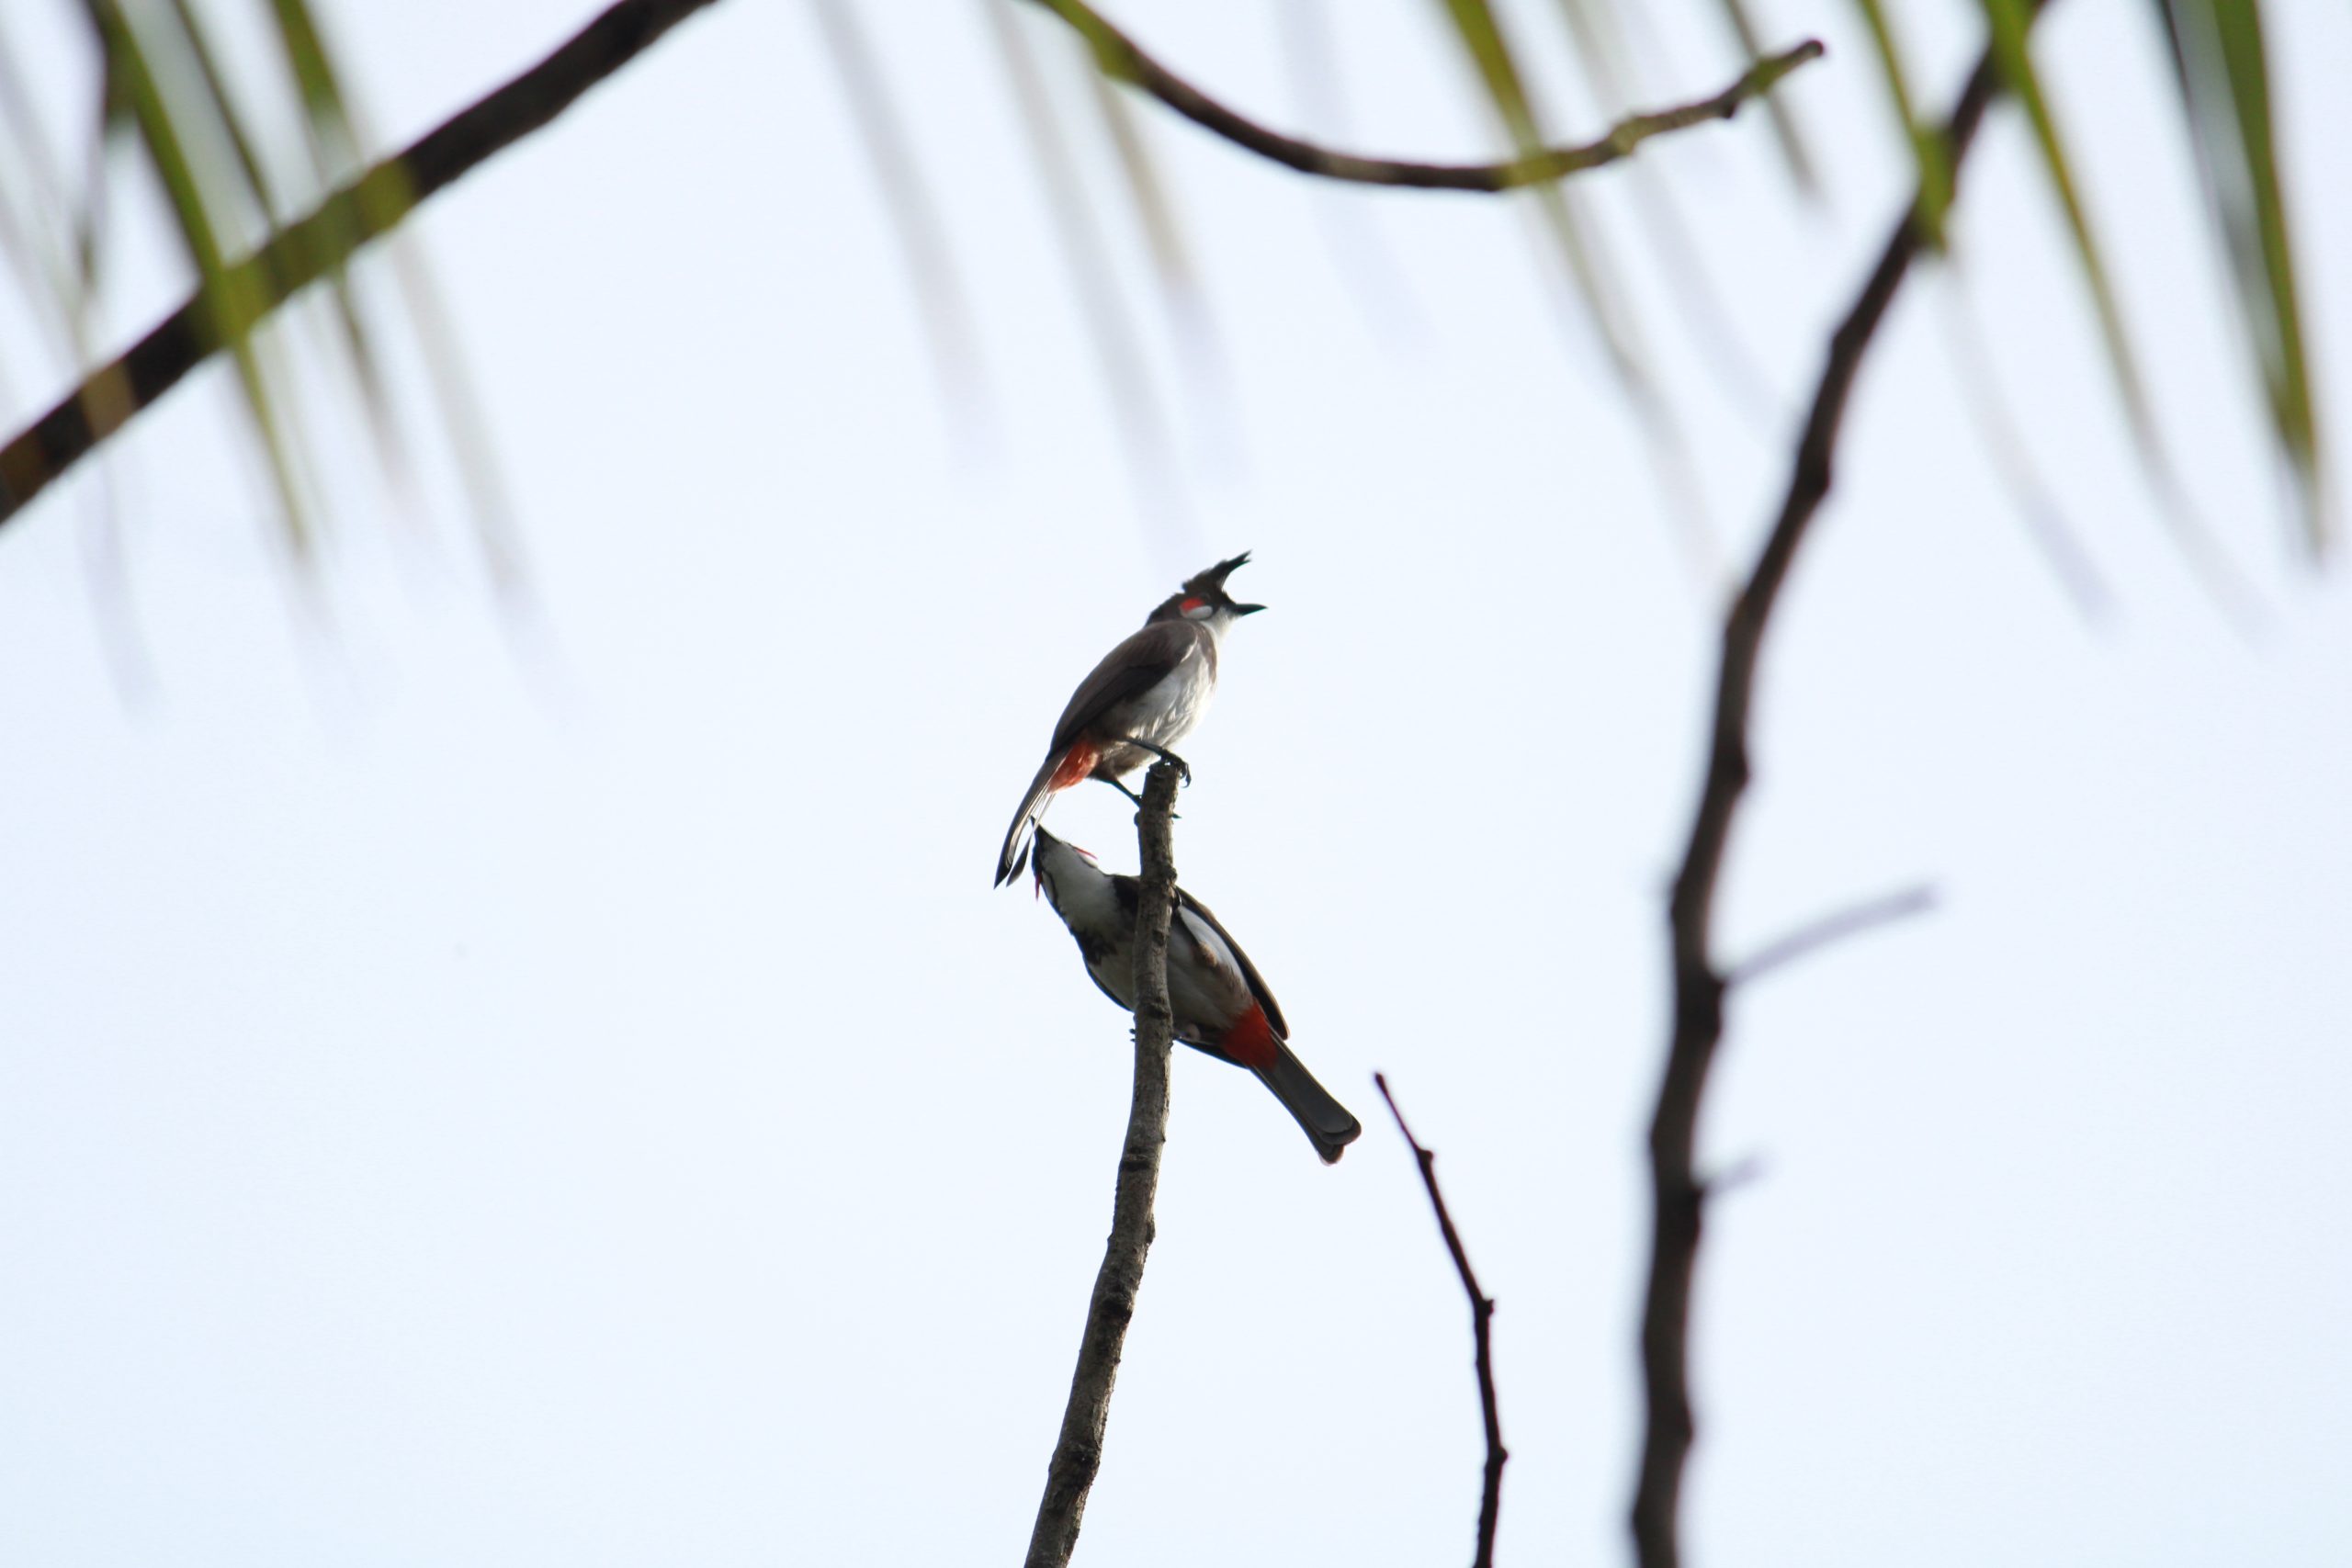 A pair of birds on a twig